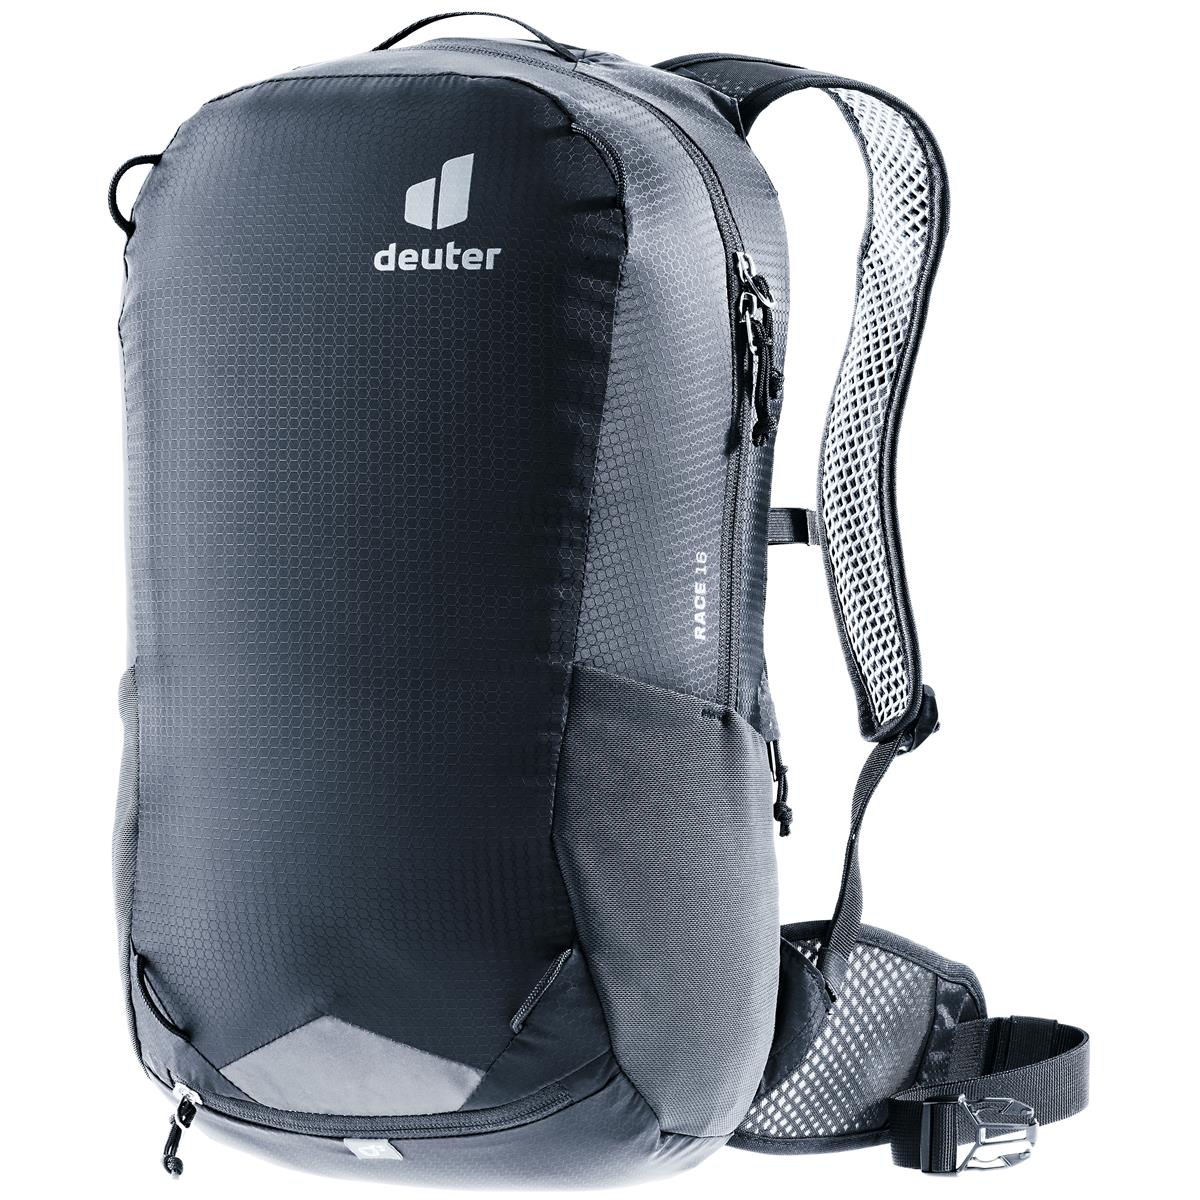 Deuter MTB Backpack with Hydration System Compartment Race 16 16L - Black